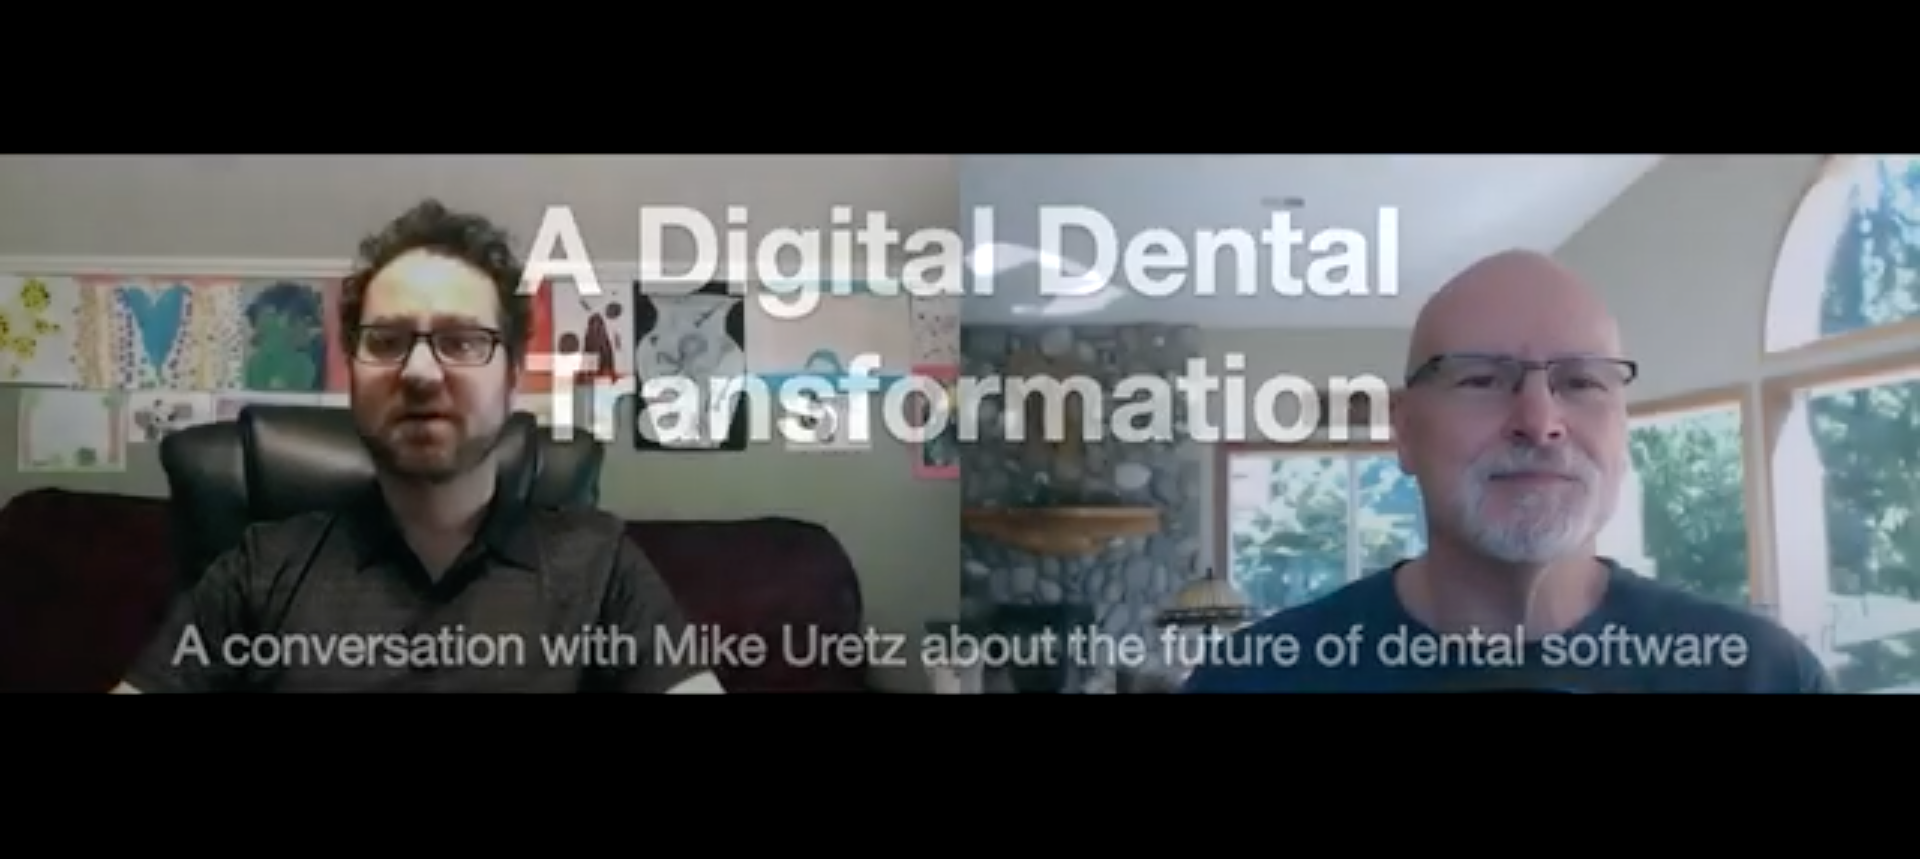 A digital dental transformation: A conversation with Mike Uretz about the future of dental software.